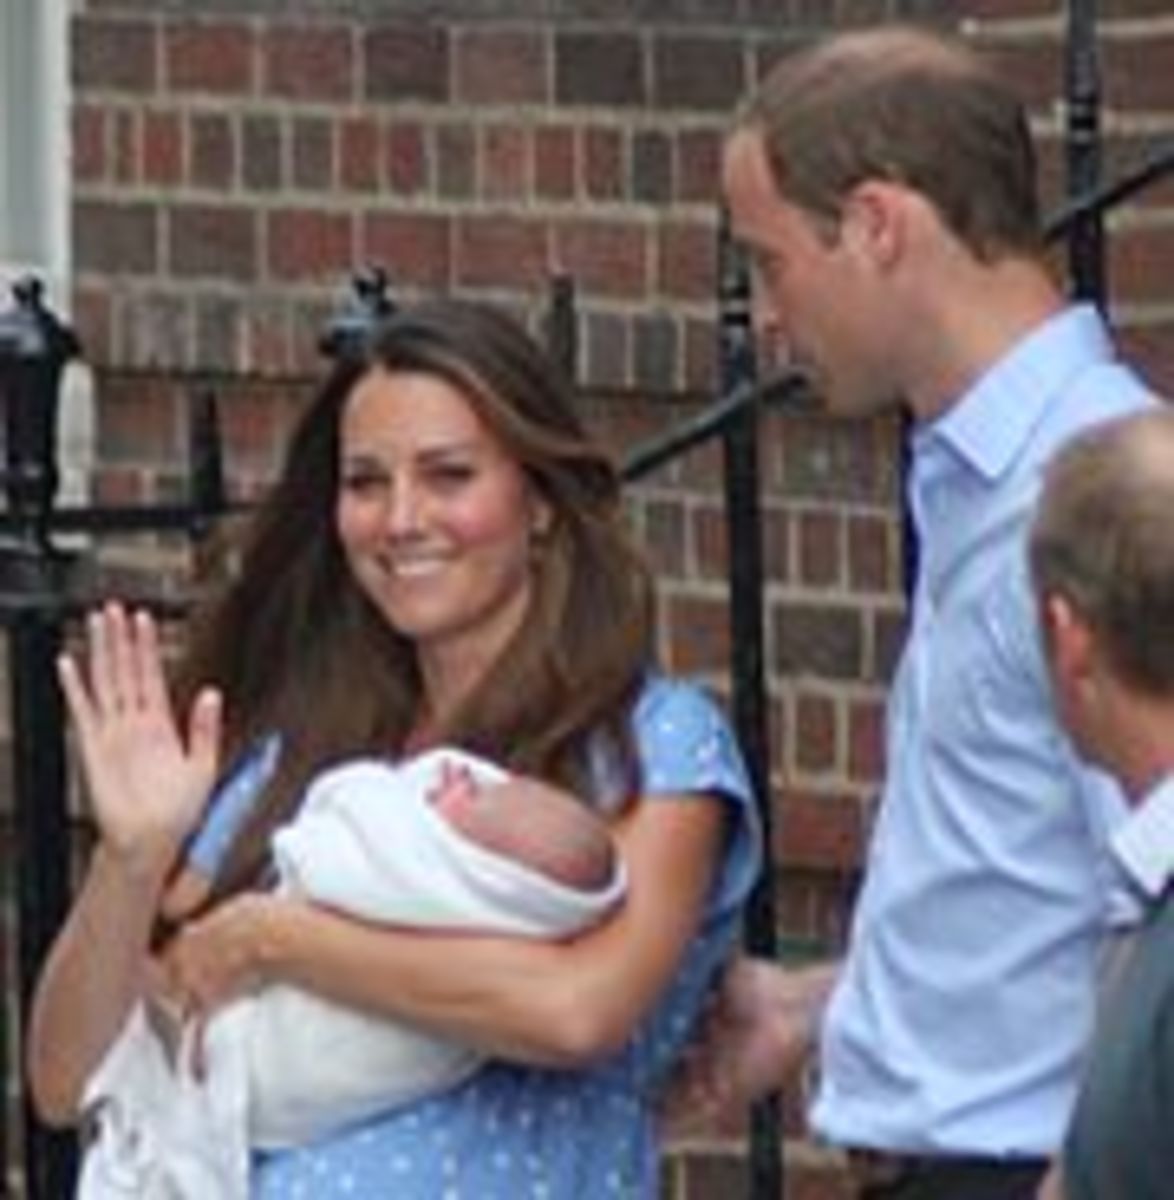 Kate Middleton adores motherhood, seen here just after giving birth to her son, George, Prince of Cambridge